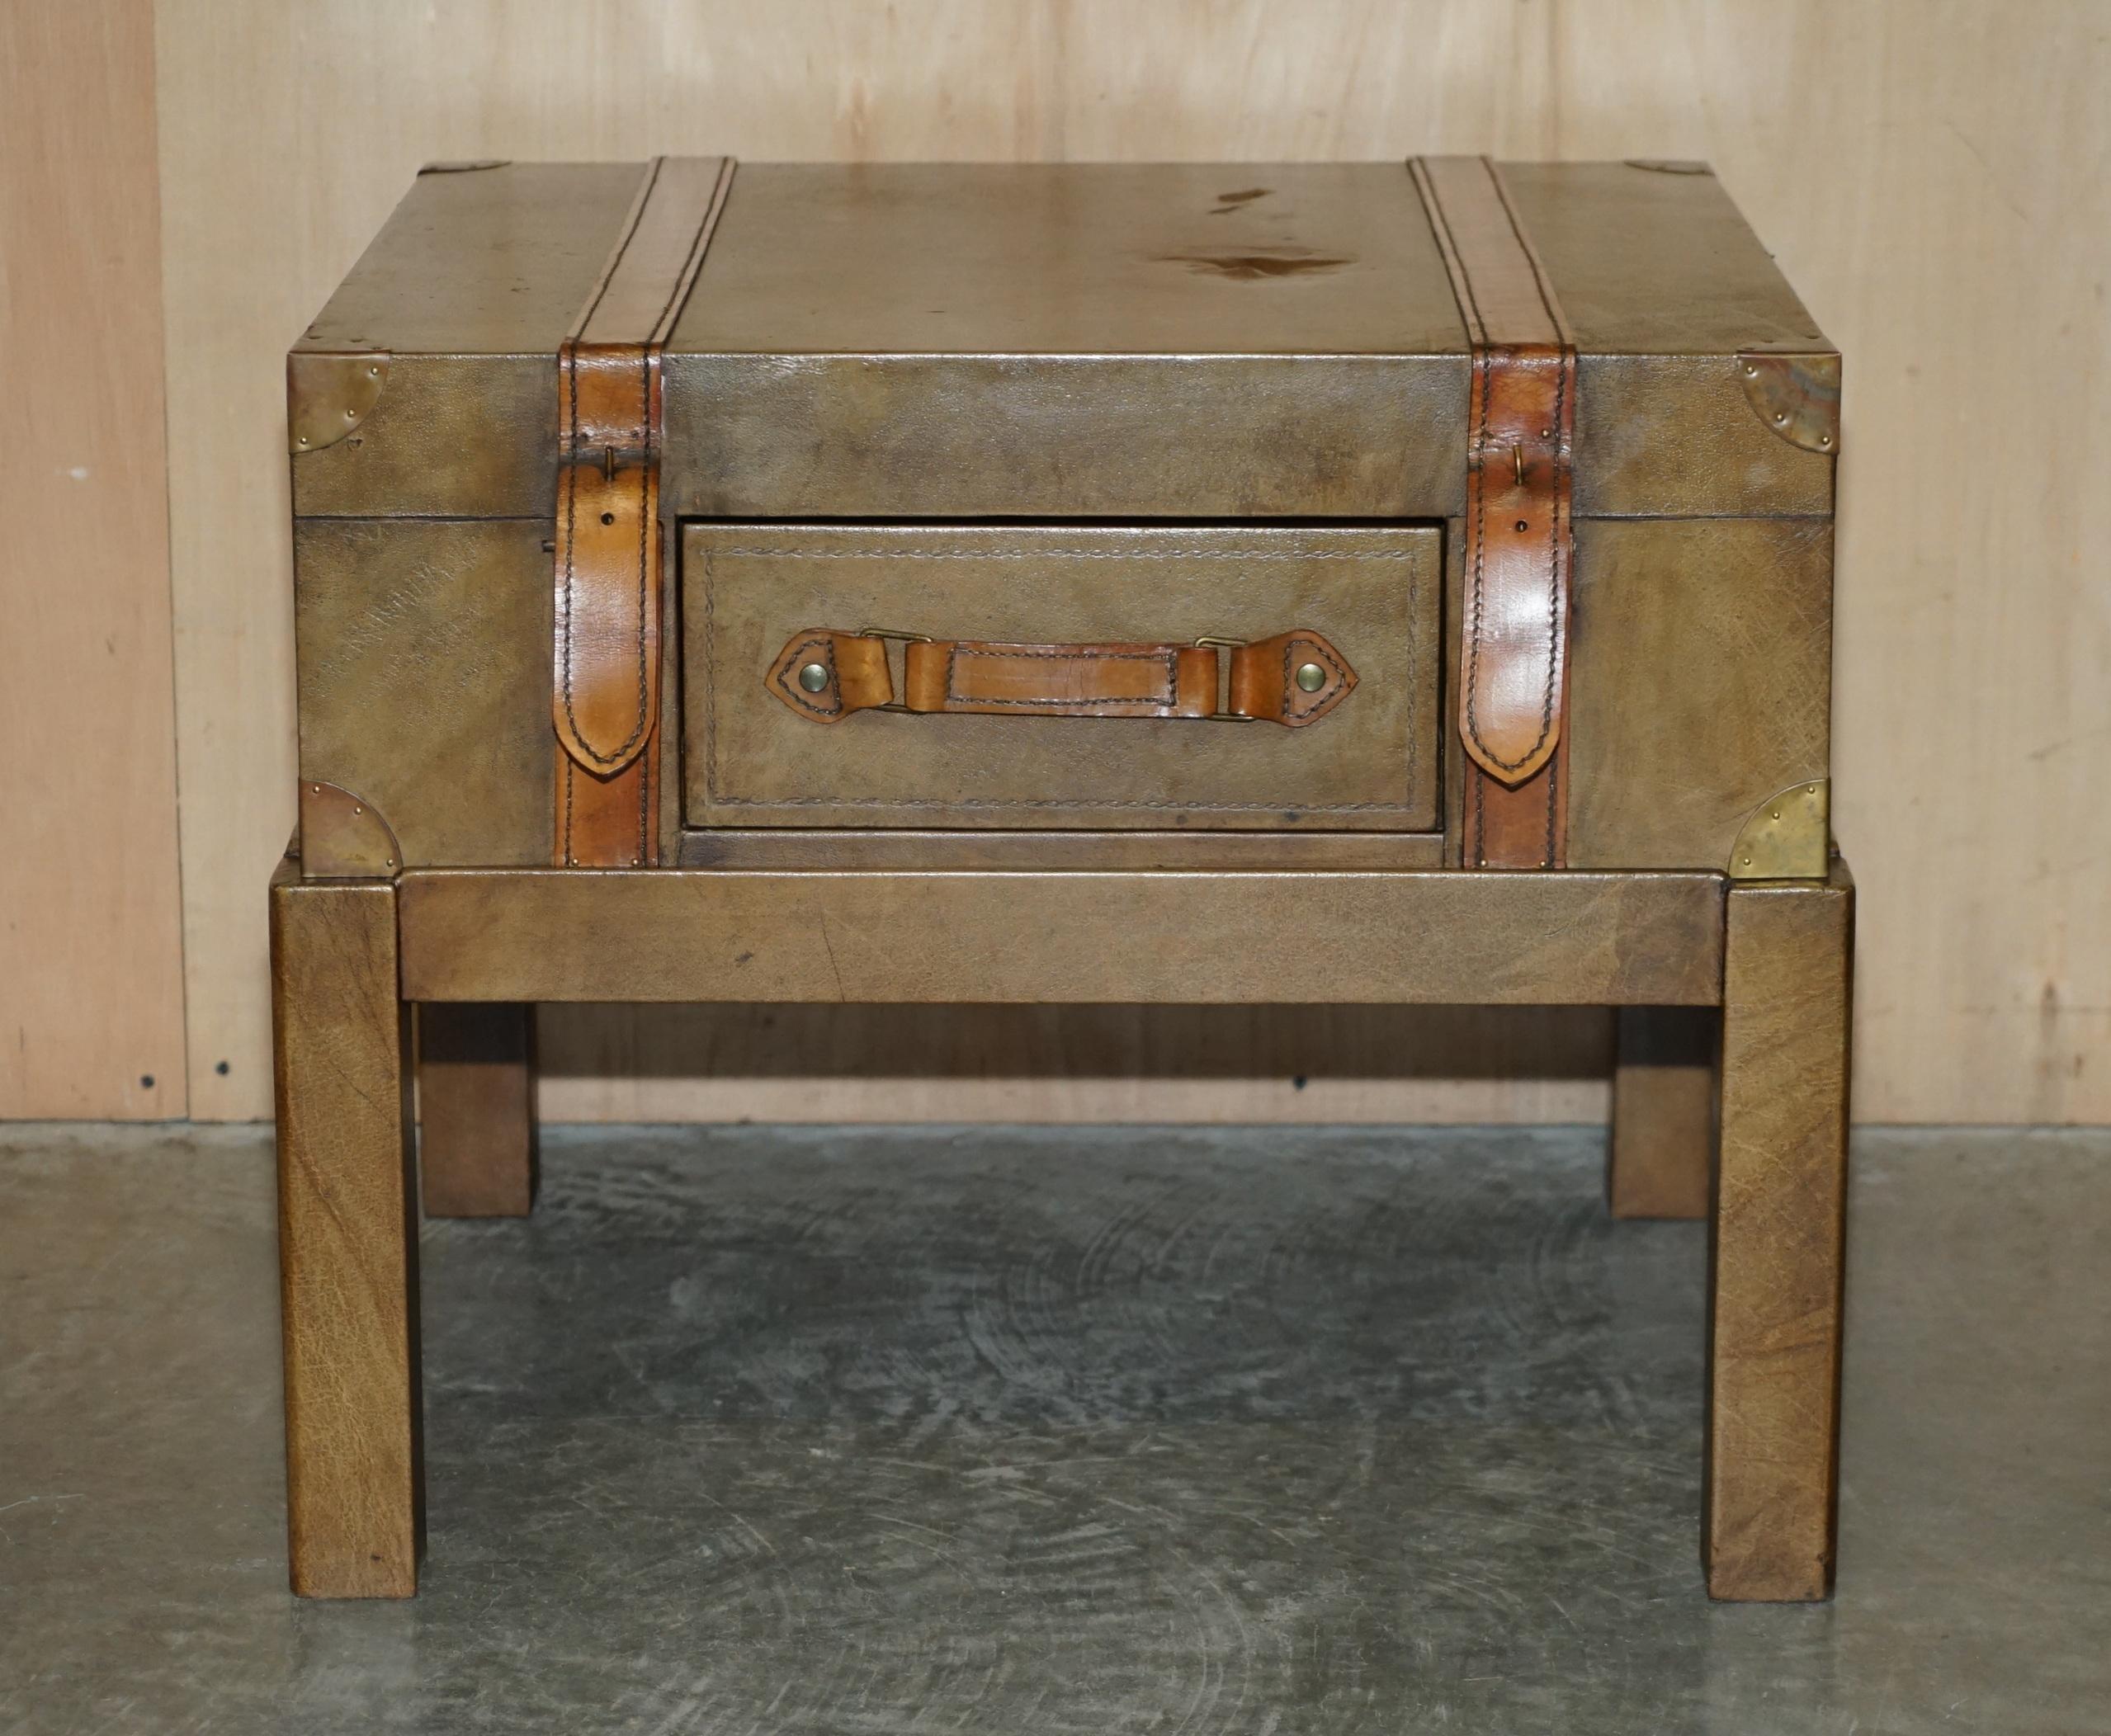 Royal House Antiques

Royal House Antiques is delighted to offer for sale this brown leather trunk / suitcase coffee table with one drawer

Please note the delivery fee listed is just a guide, it covers within the M25 only for the UK and local